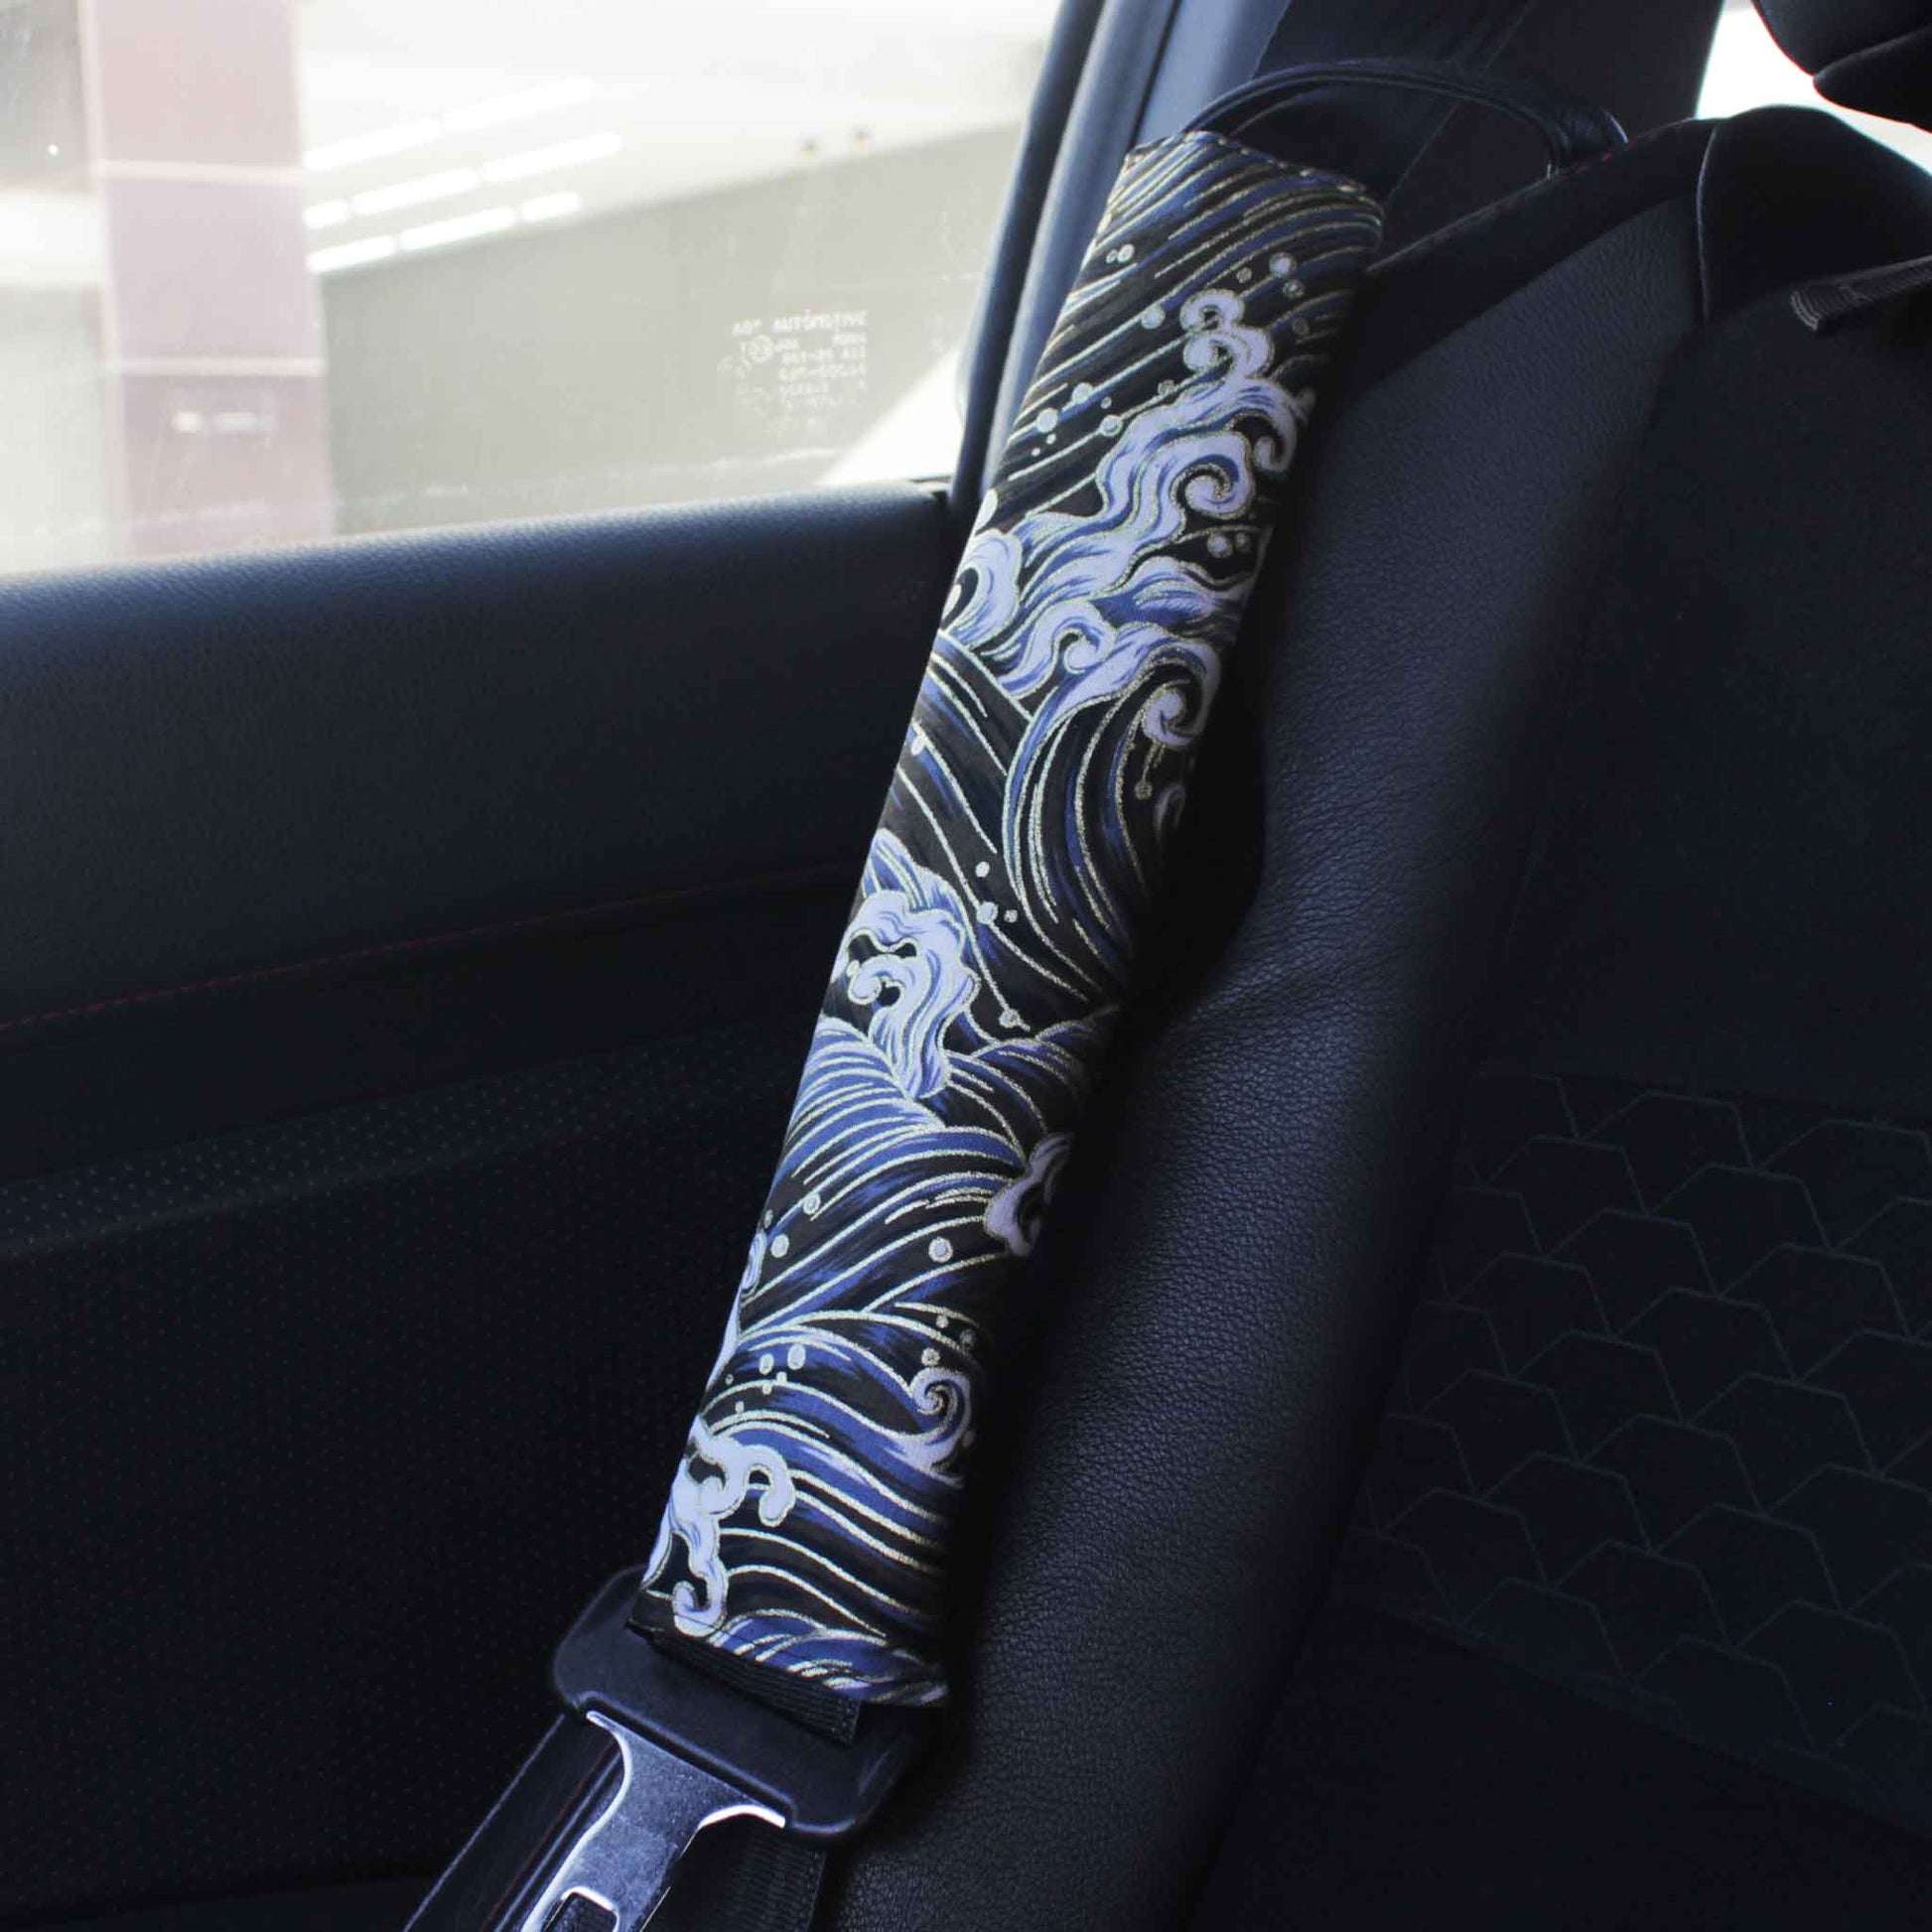 A seat belt cover with black great waves pattern installed on a Toyota 86's seat belt